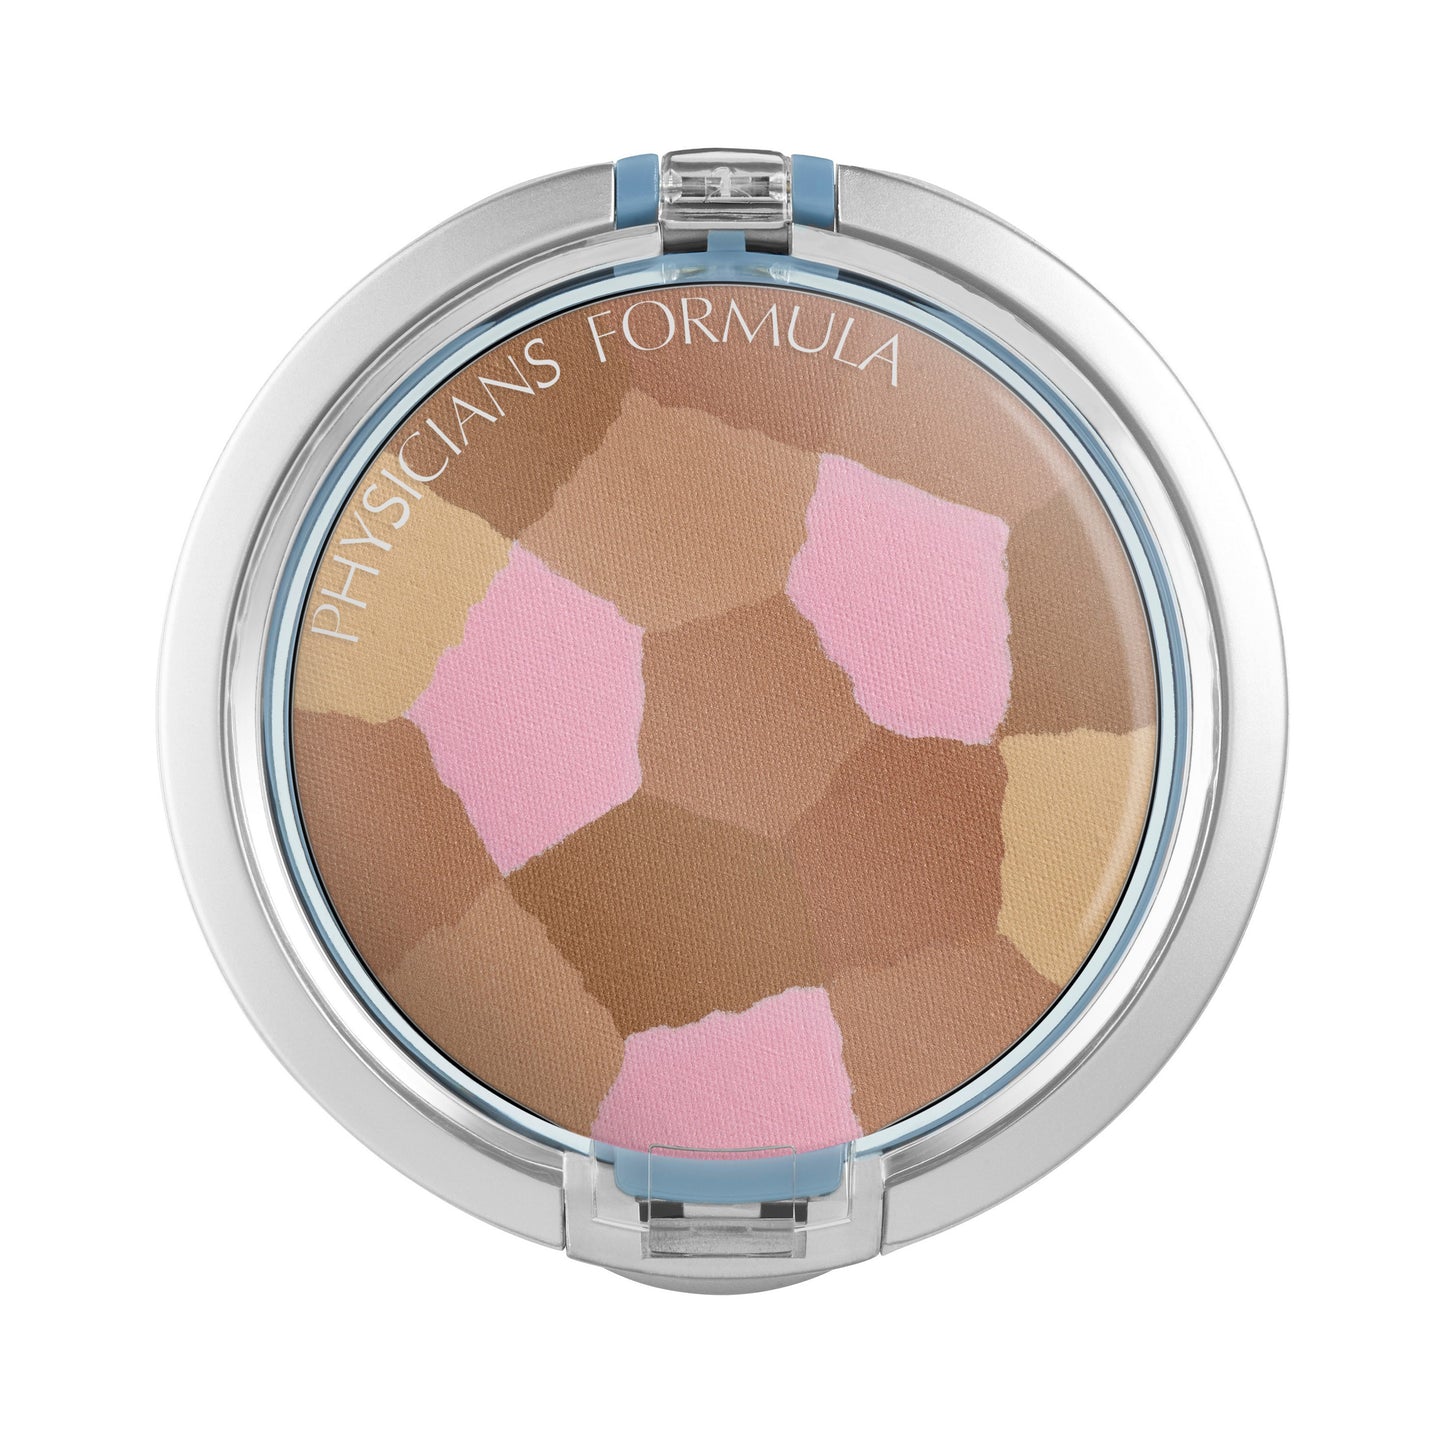 Physicians Formula Powder Palette Multi-Colored Healthy Glow